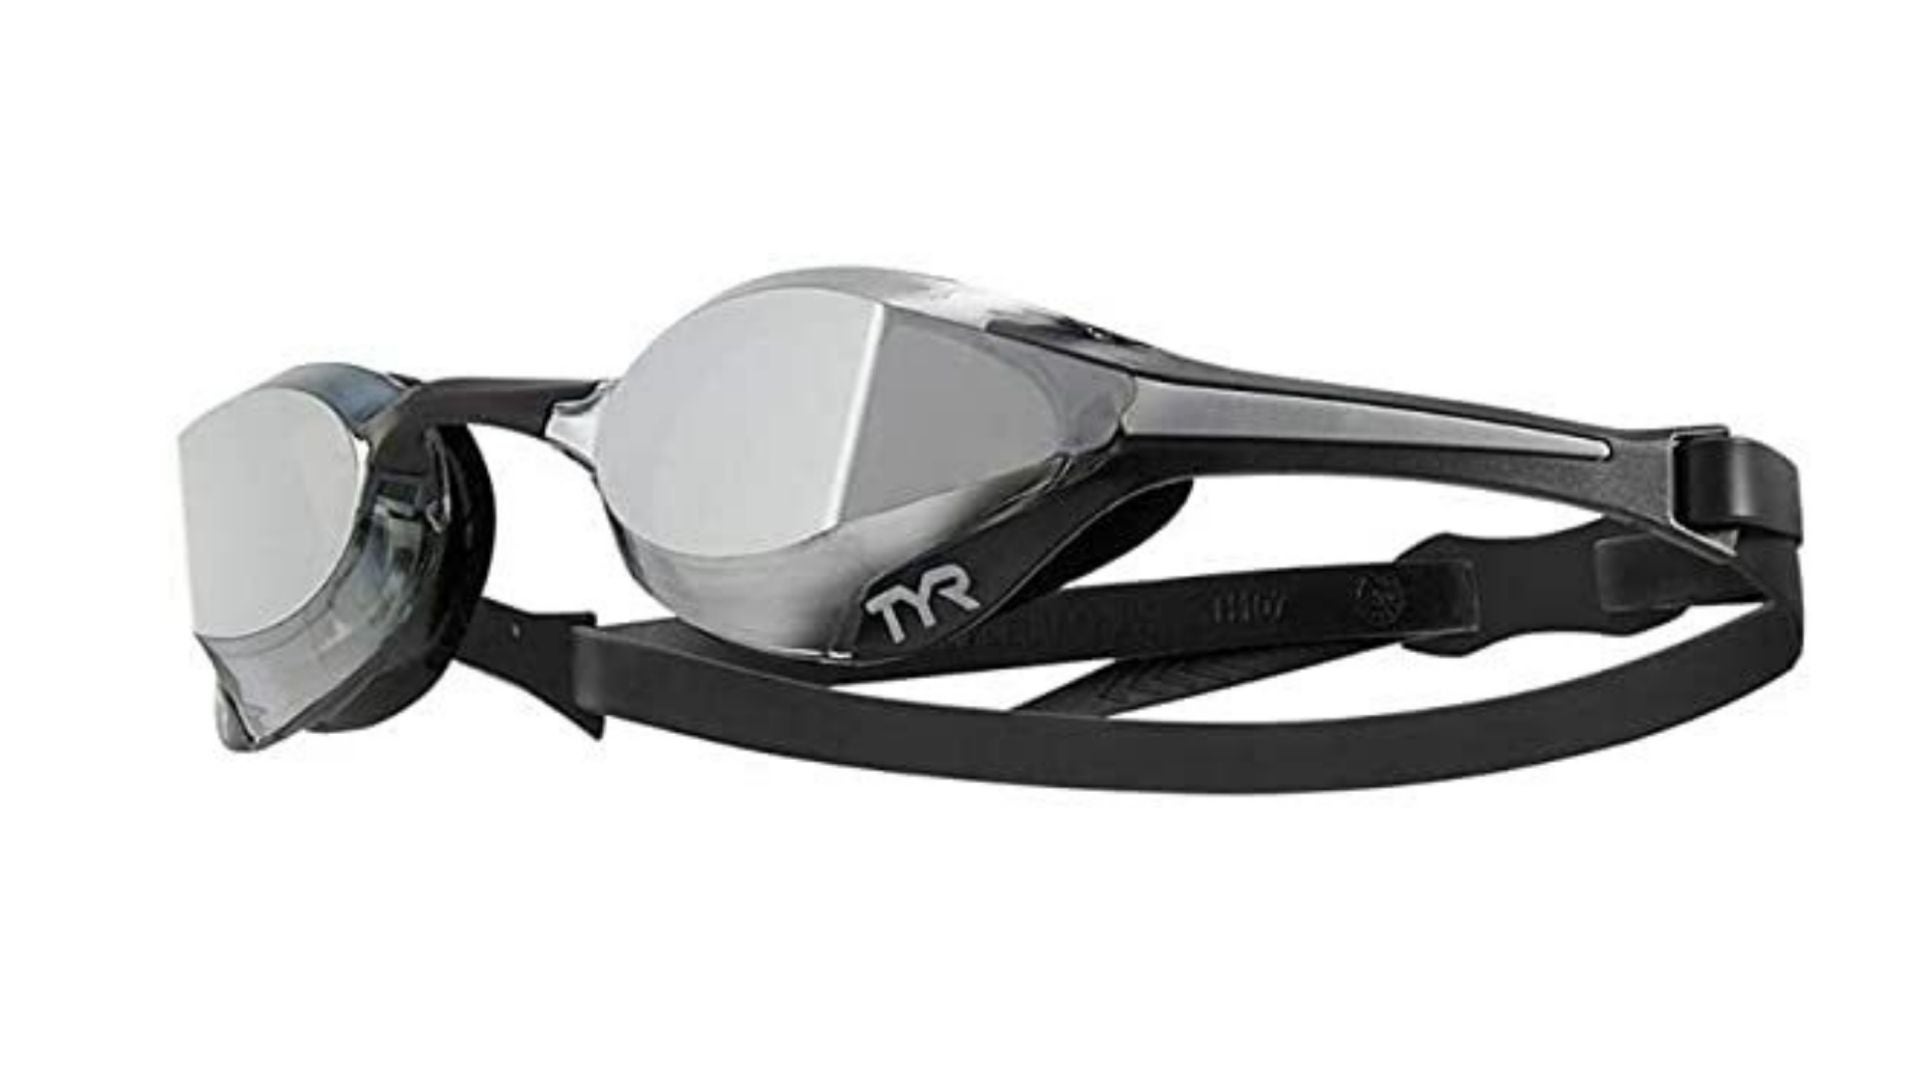 TYR Tracer-X Elite Racing Goggles